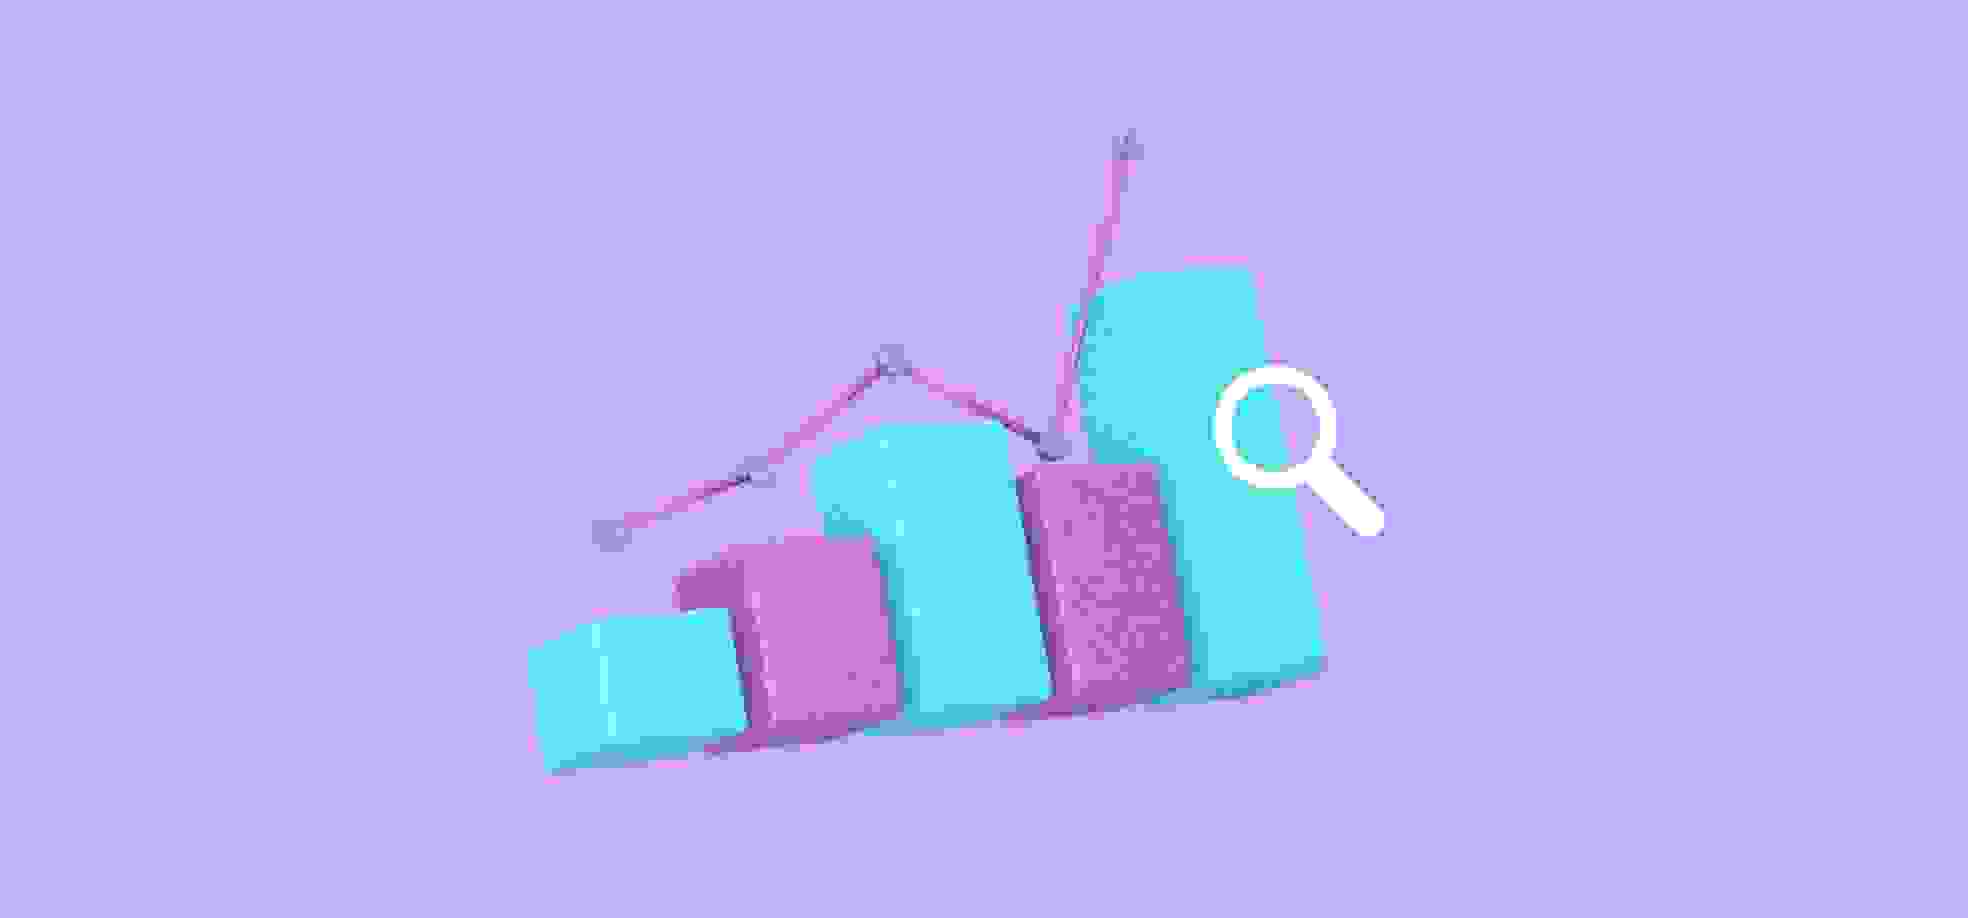 a 3D chart on a purple background illustration